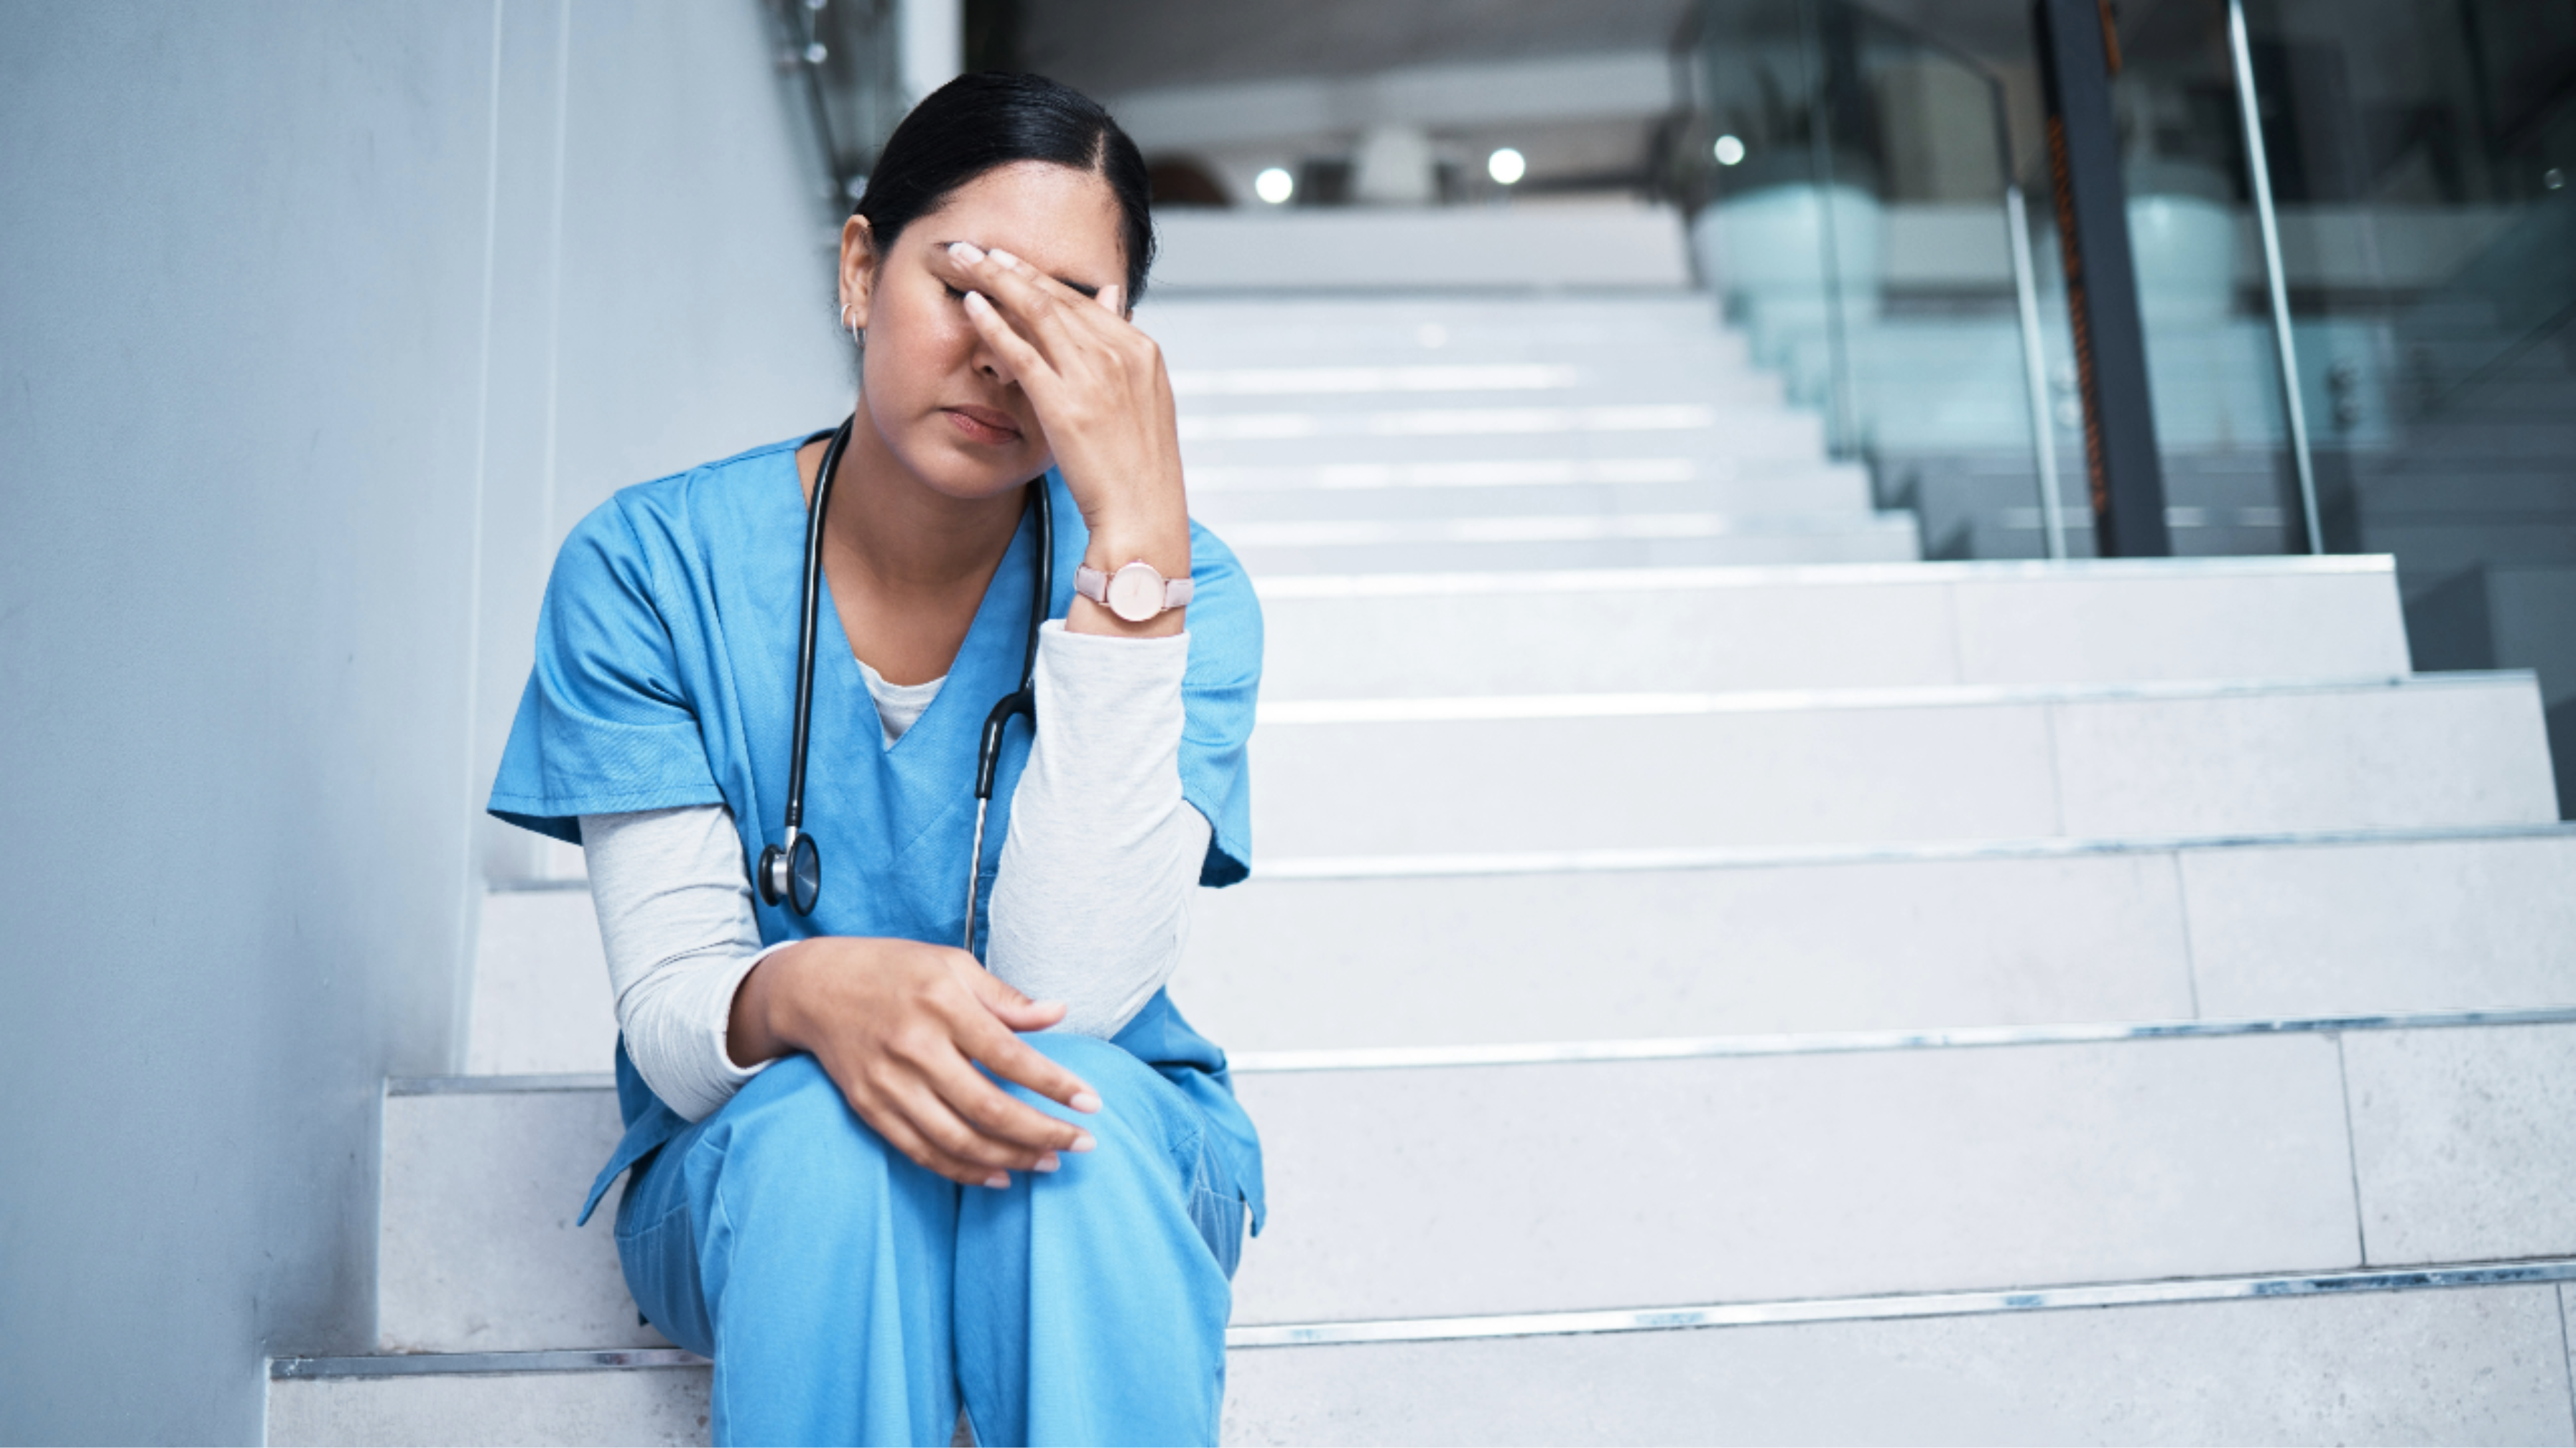 Image: A stressed nurse in a hospital setting, symbolizing workplace incivility and its impact on healthcare professionals.